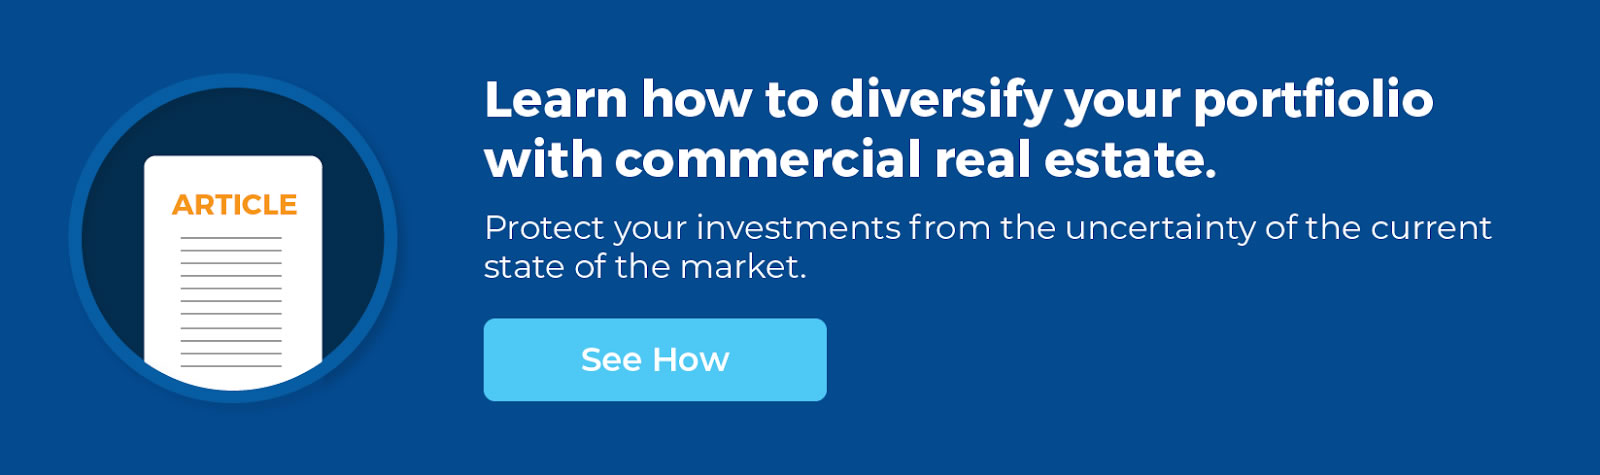 the-ultimate-guide-to-commercial-real-estate-investing-cta2